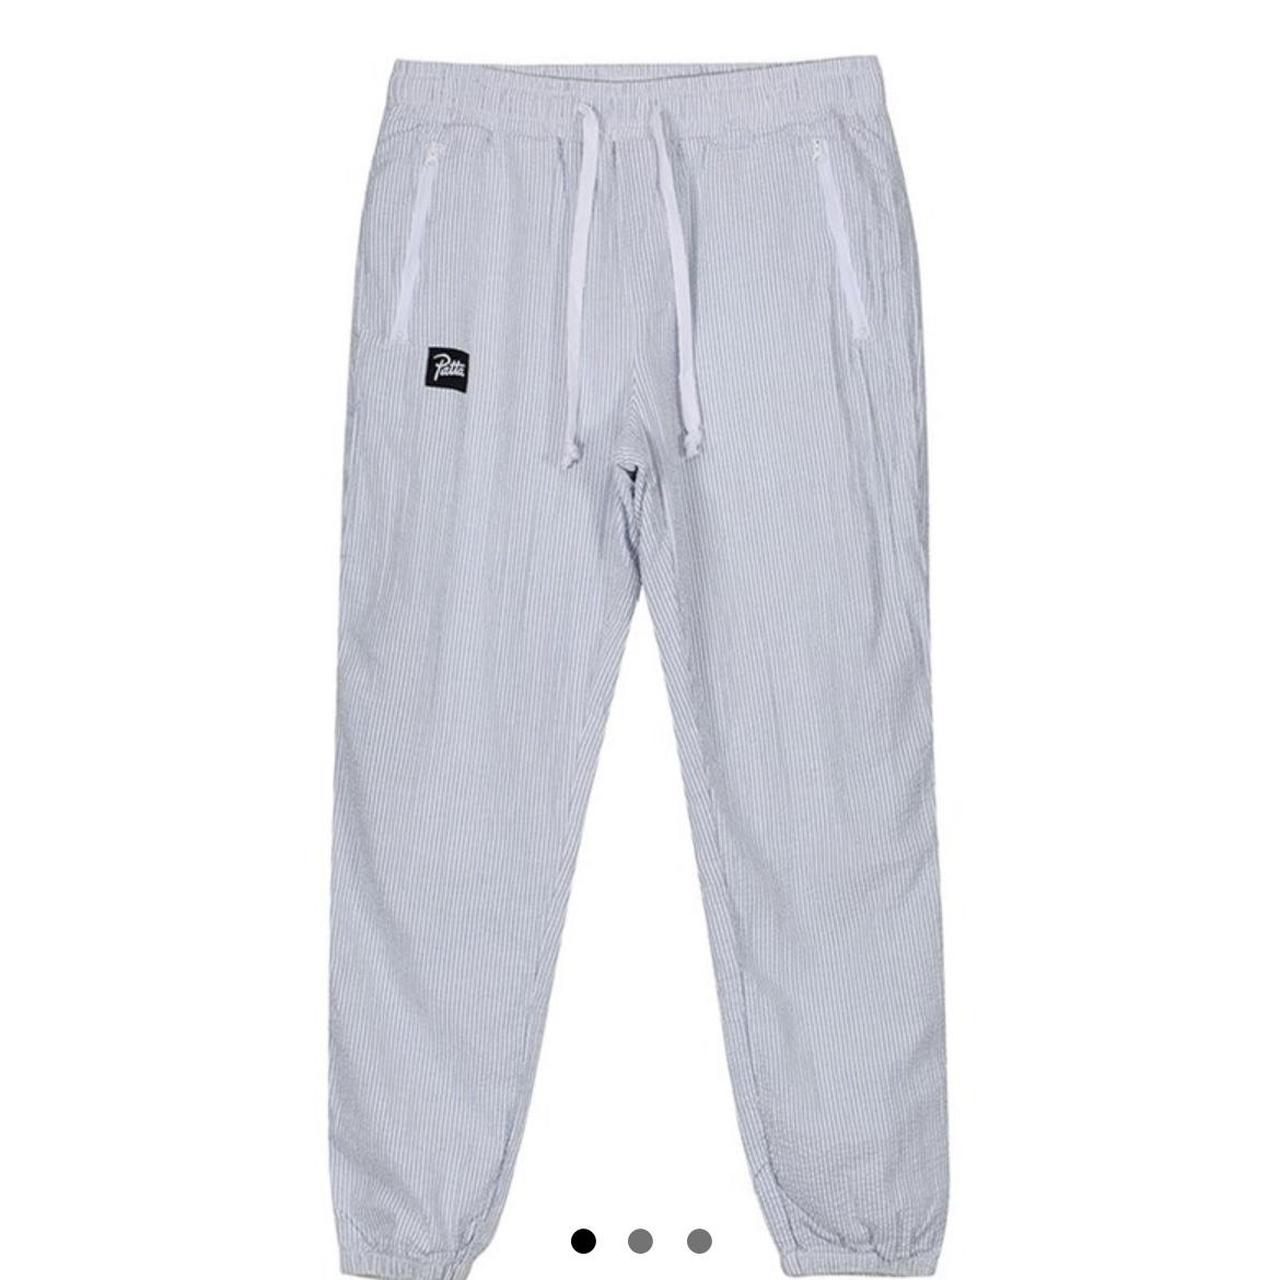 Product Image 4 - Patta Joggers size S